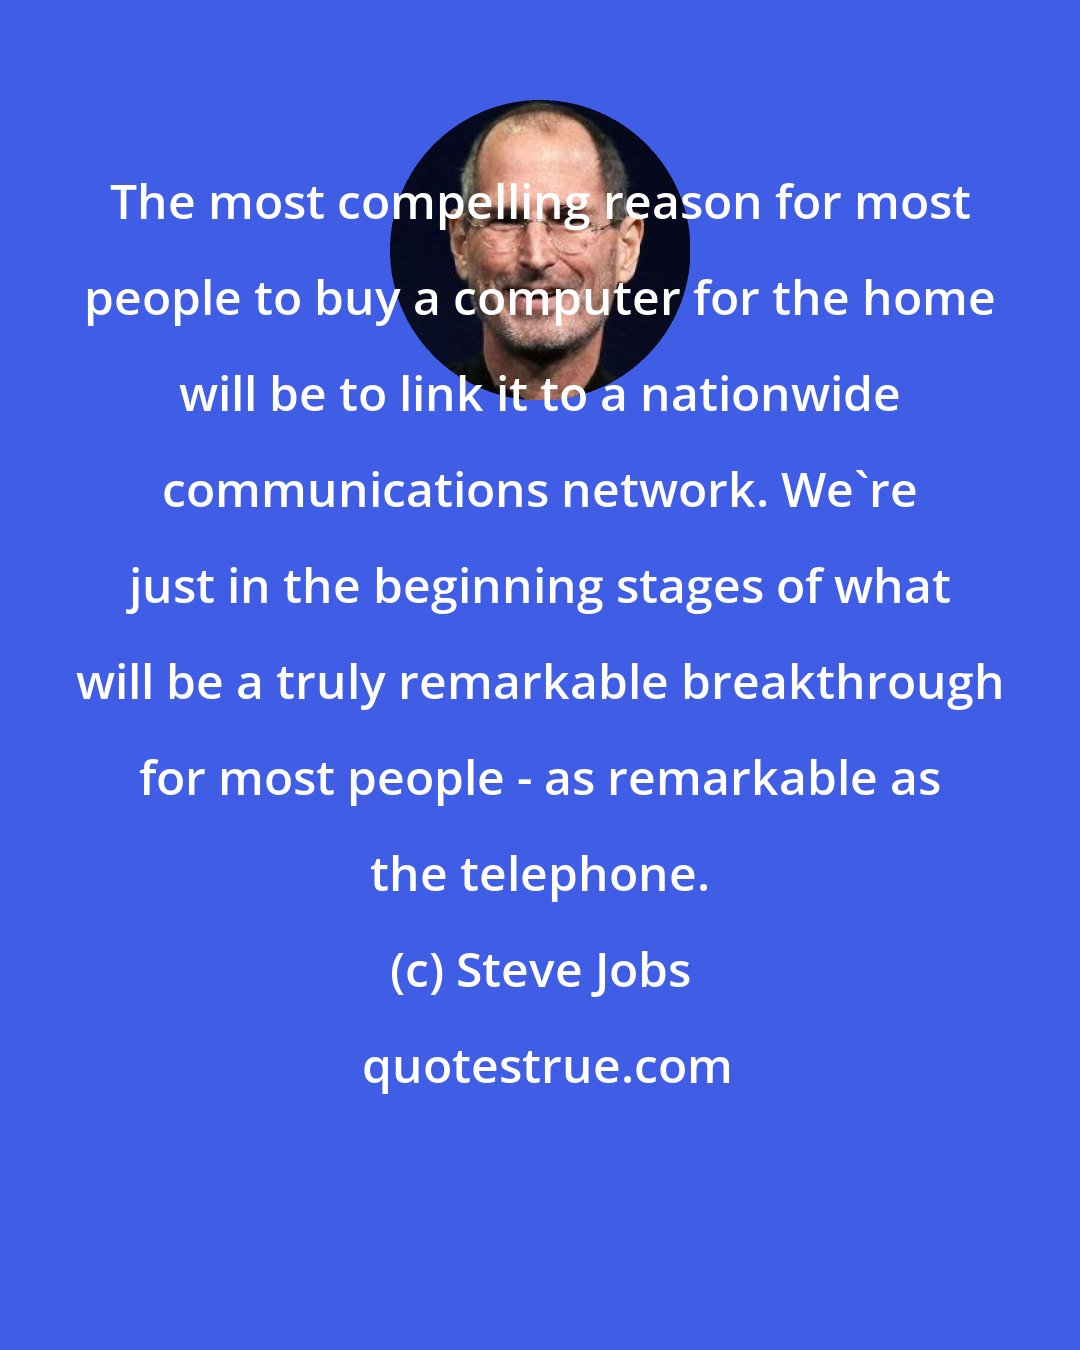 Steve Jobs: The most compelling reason for most people to buy a computer for the home will be to link it to a nationwide communications network. We're just in the beginning stages of what will be a truly remarkable breakthrough for most people - as remarkable as the telephone.